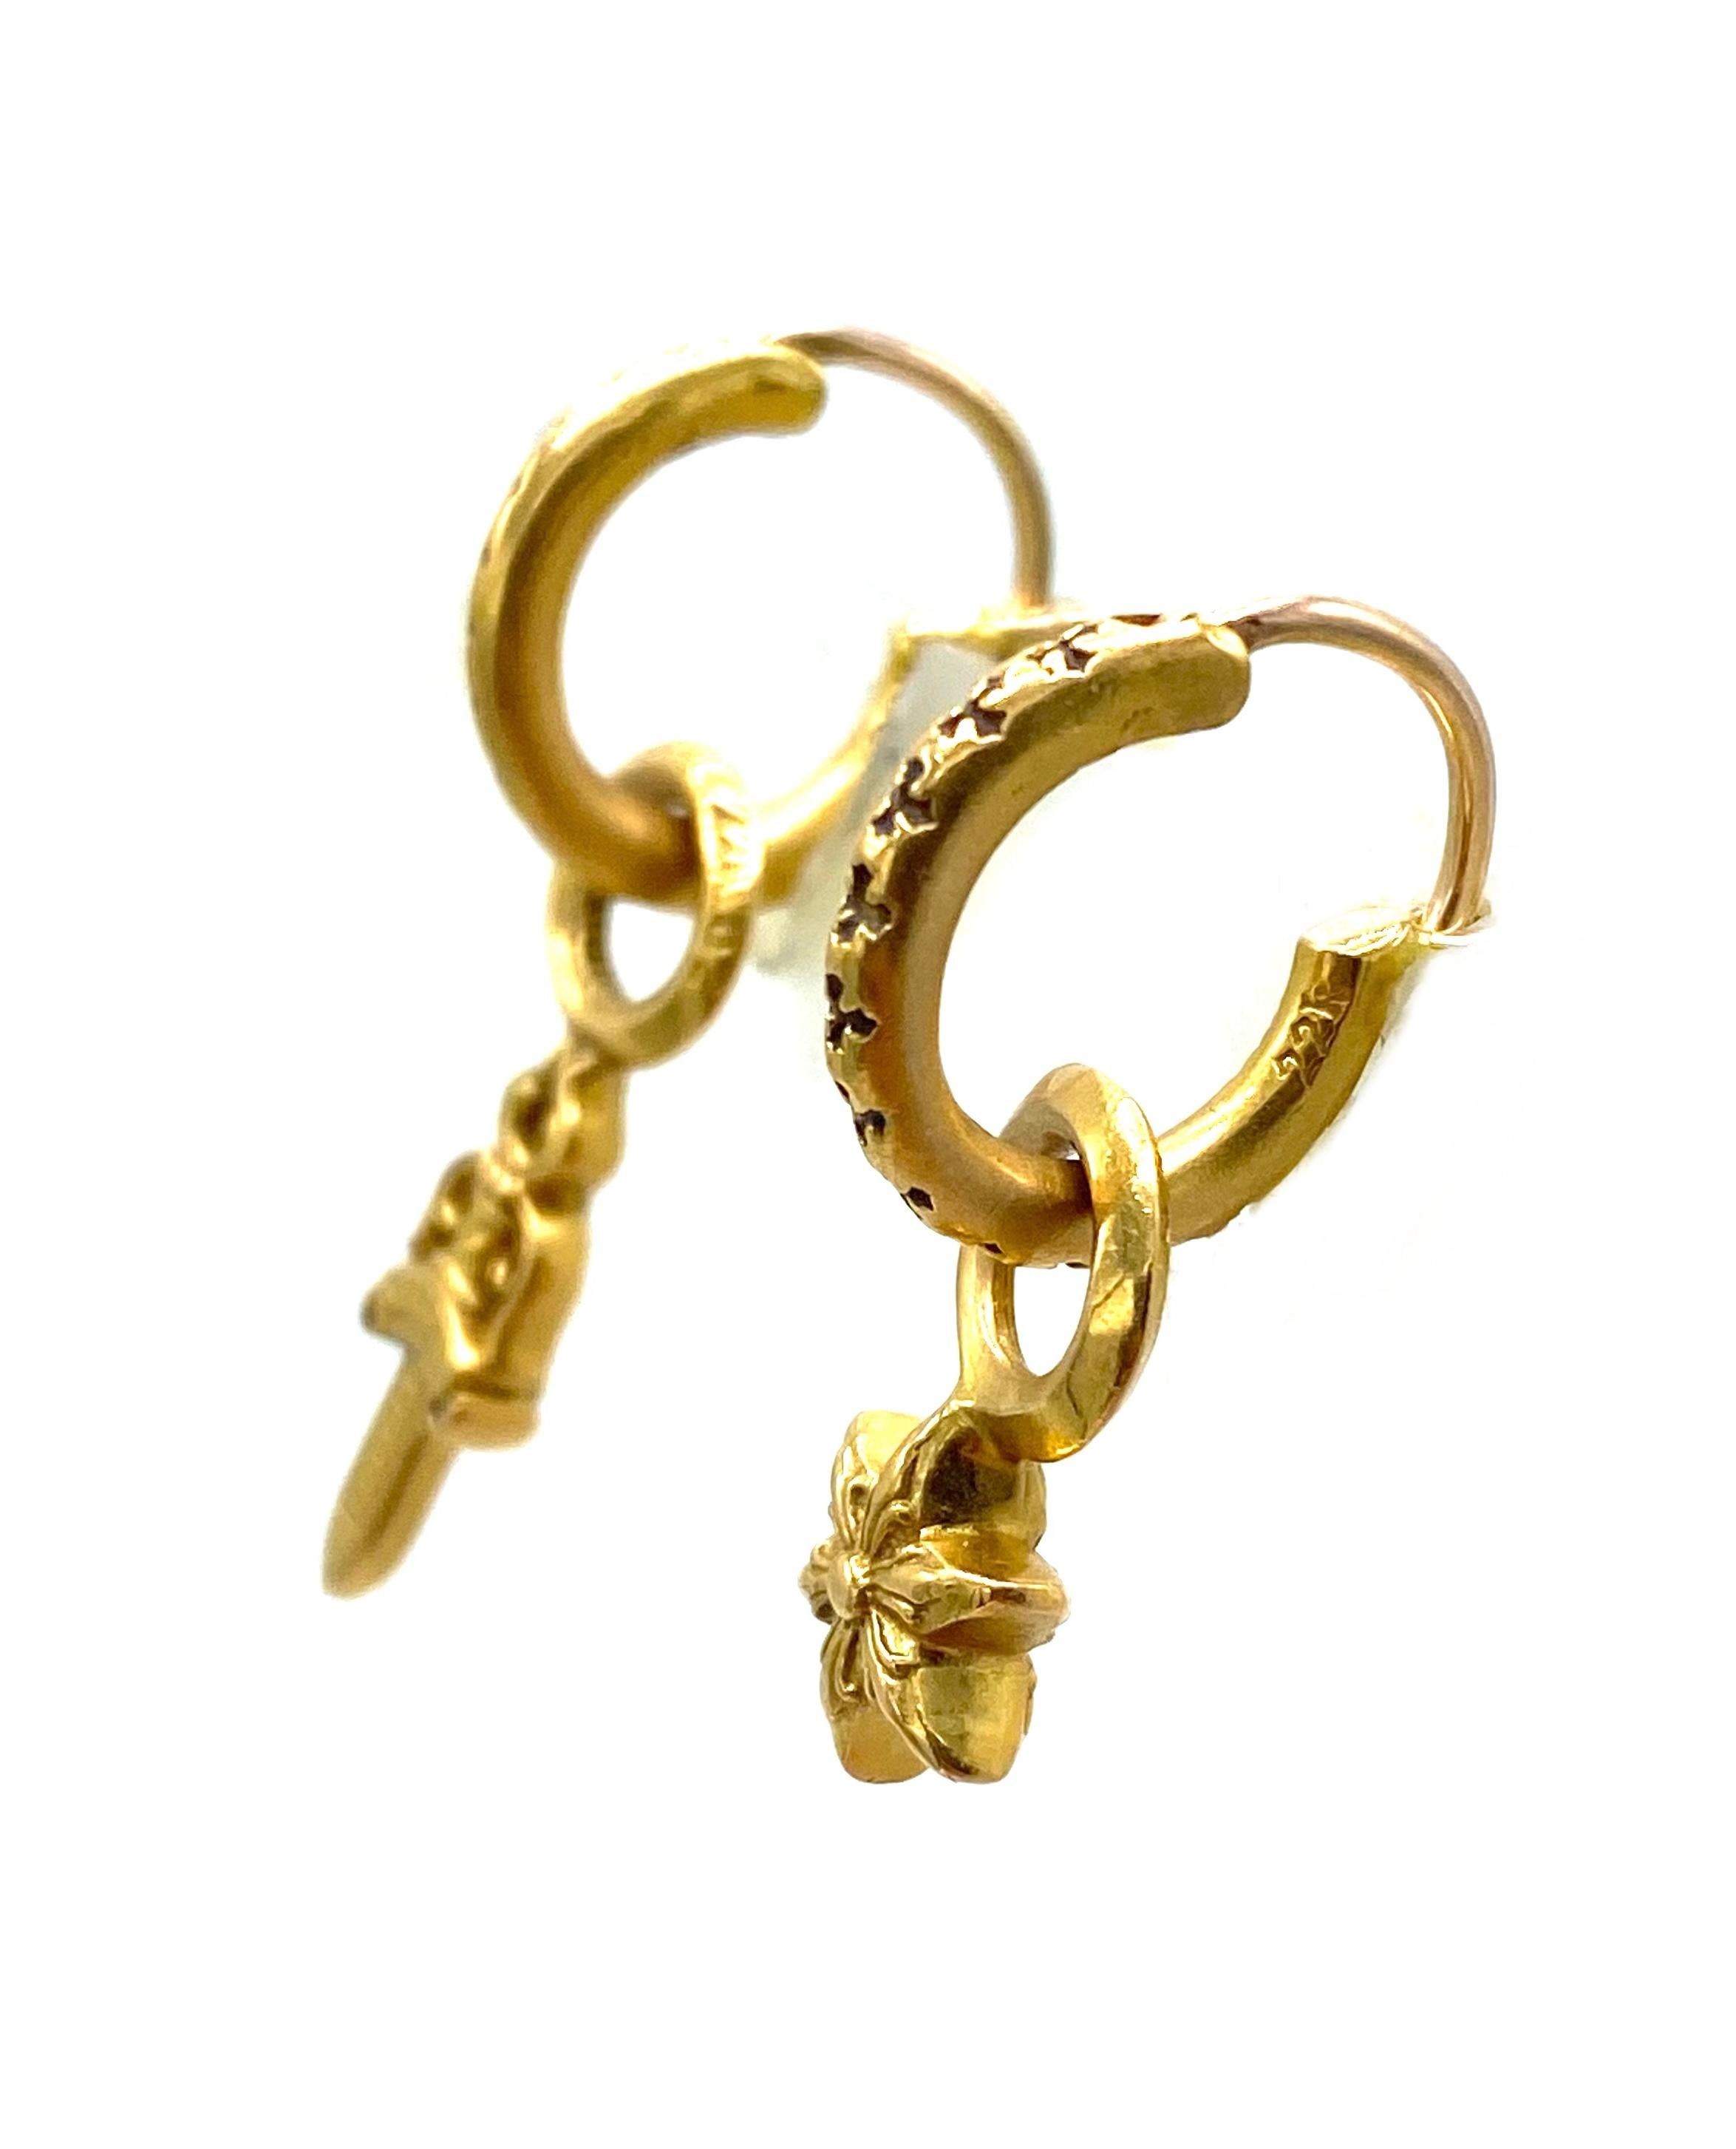 Product details:

The earrings made out of 22 karat yellow gold. it features hoop earrings with the detachable/ interchangeable charm. The earrings are signed by Chrome Hearts, stamped with the date 2014 and 22K.
The knife charm measures 1.25